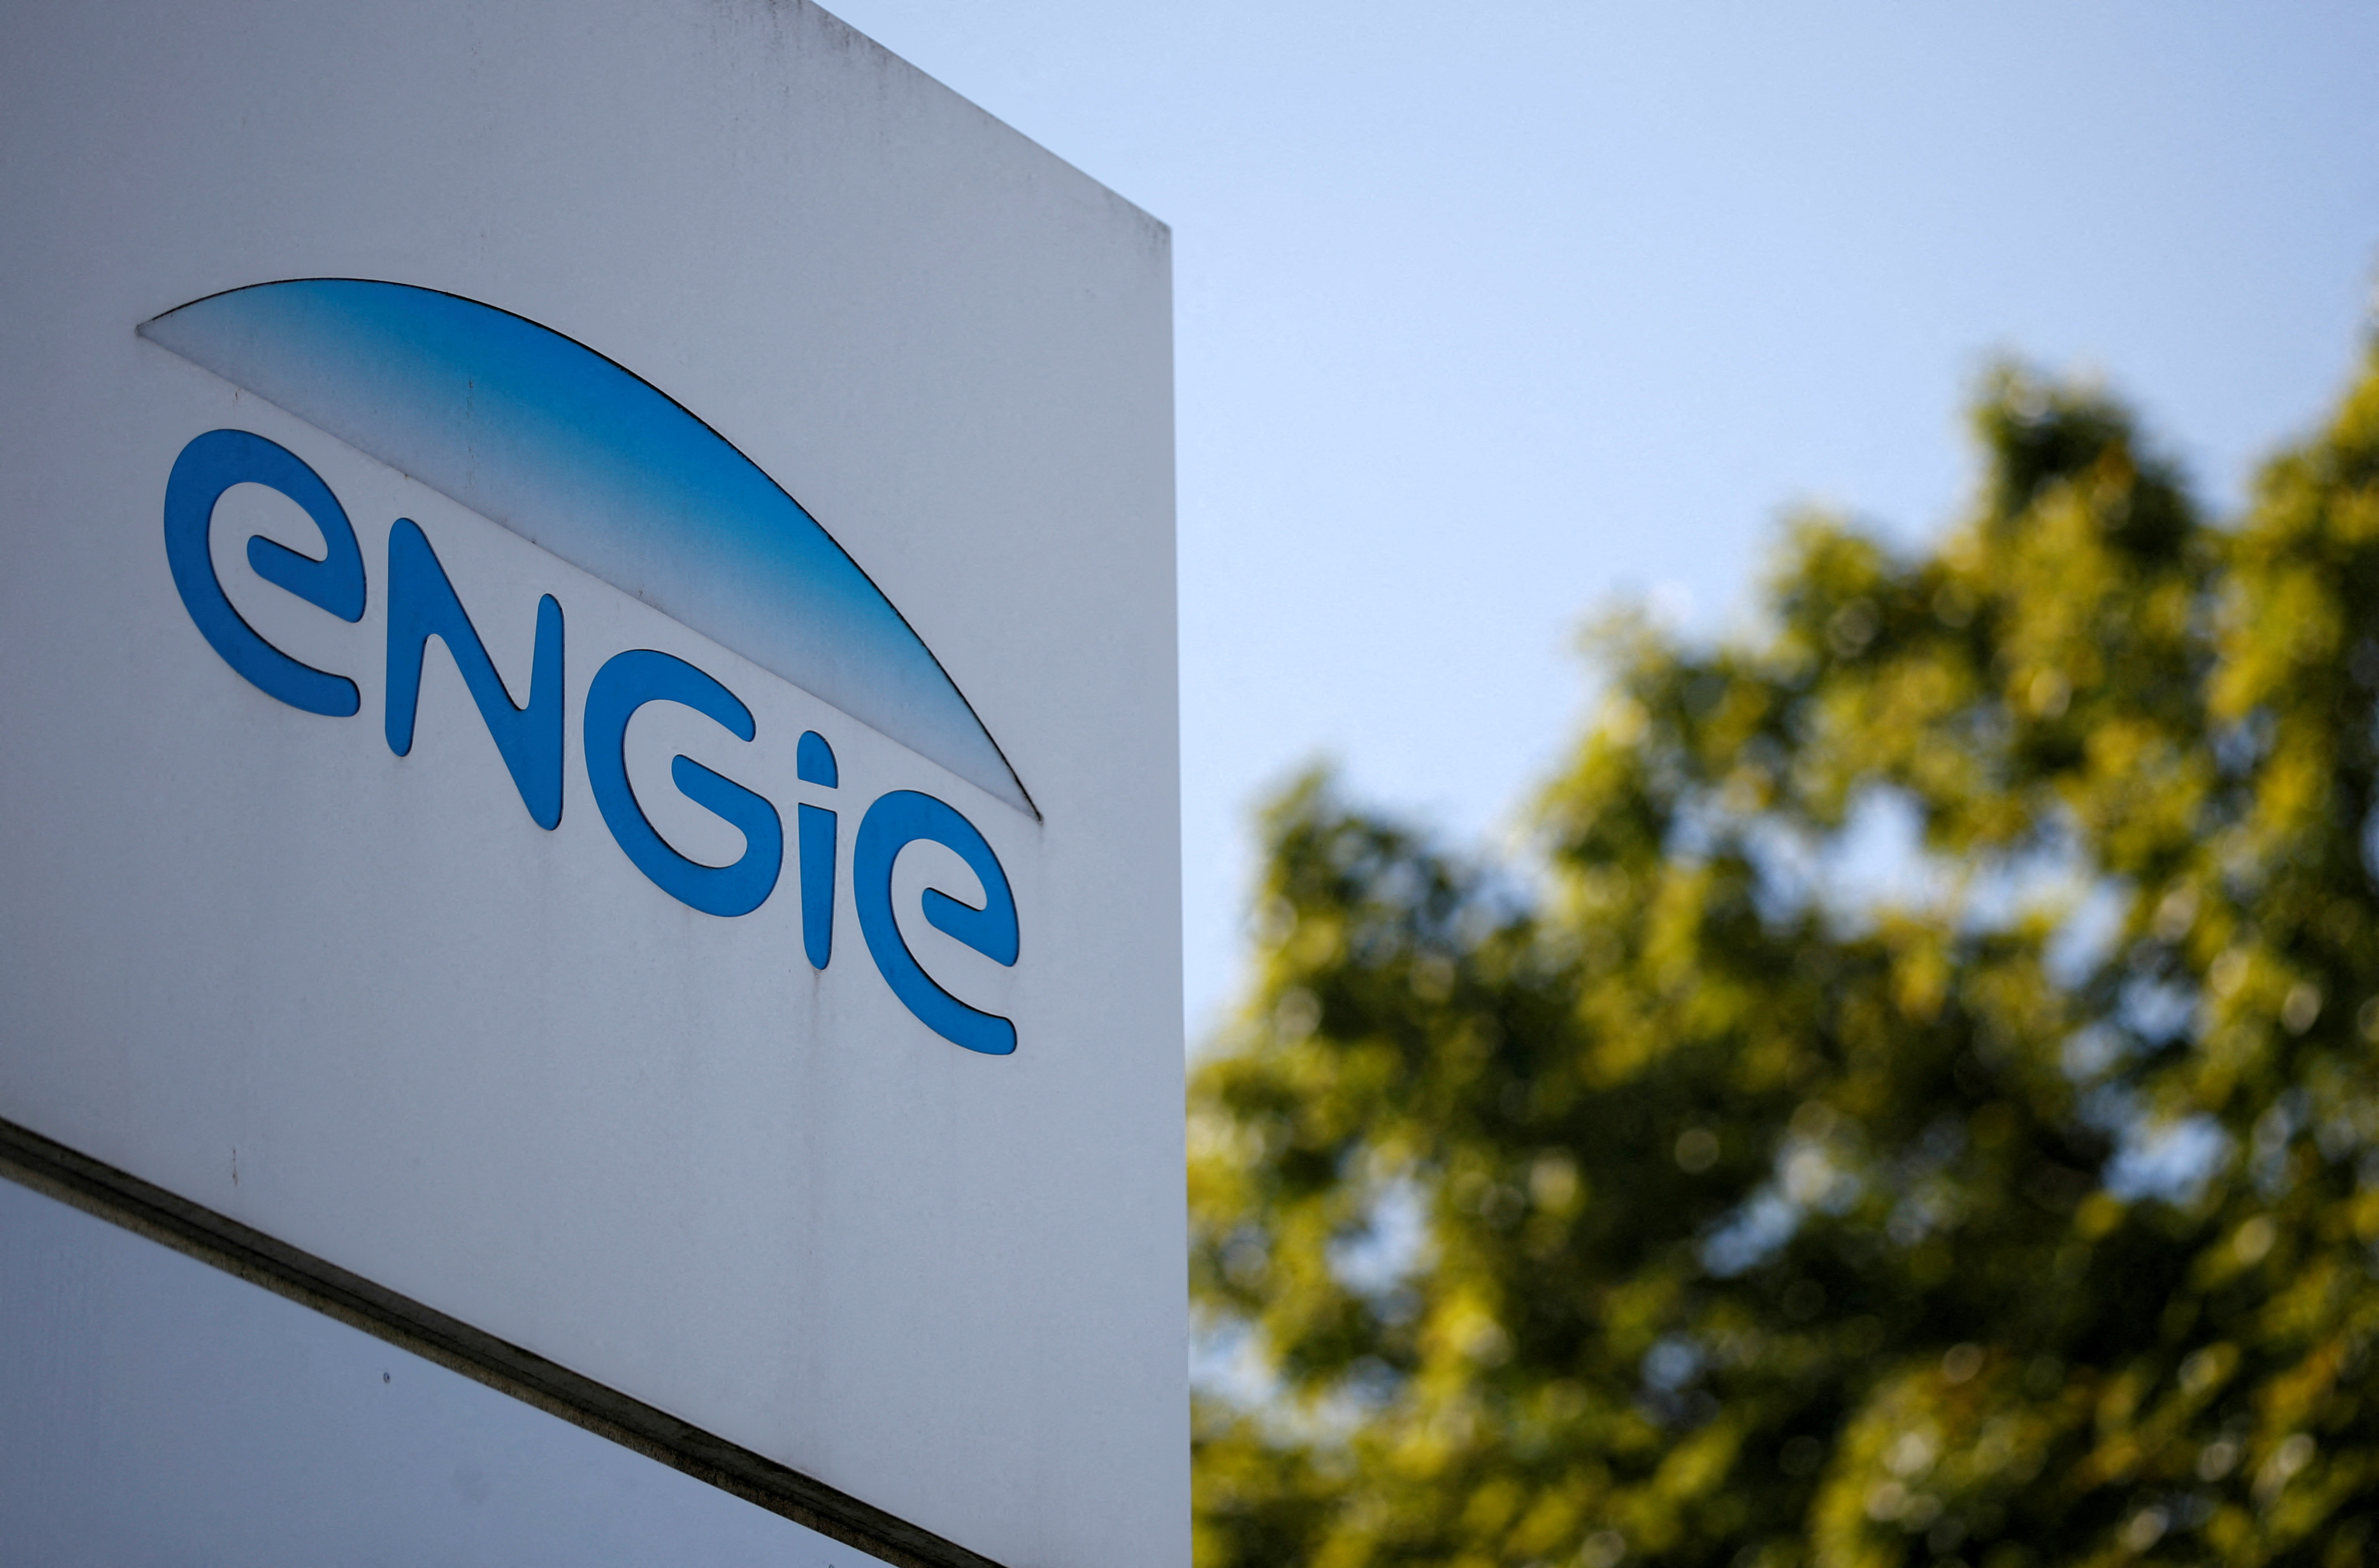 The logo of French gas and power group Engie is seen in Nantes, France